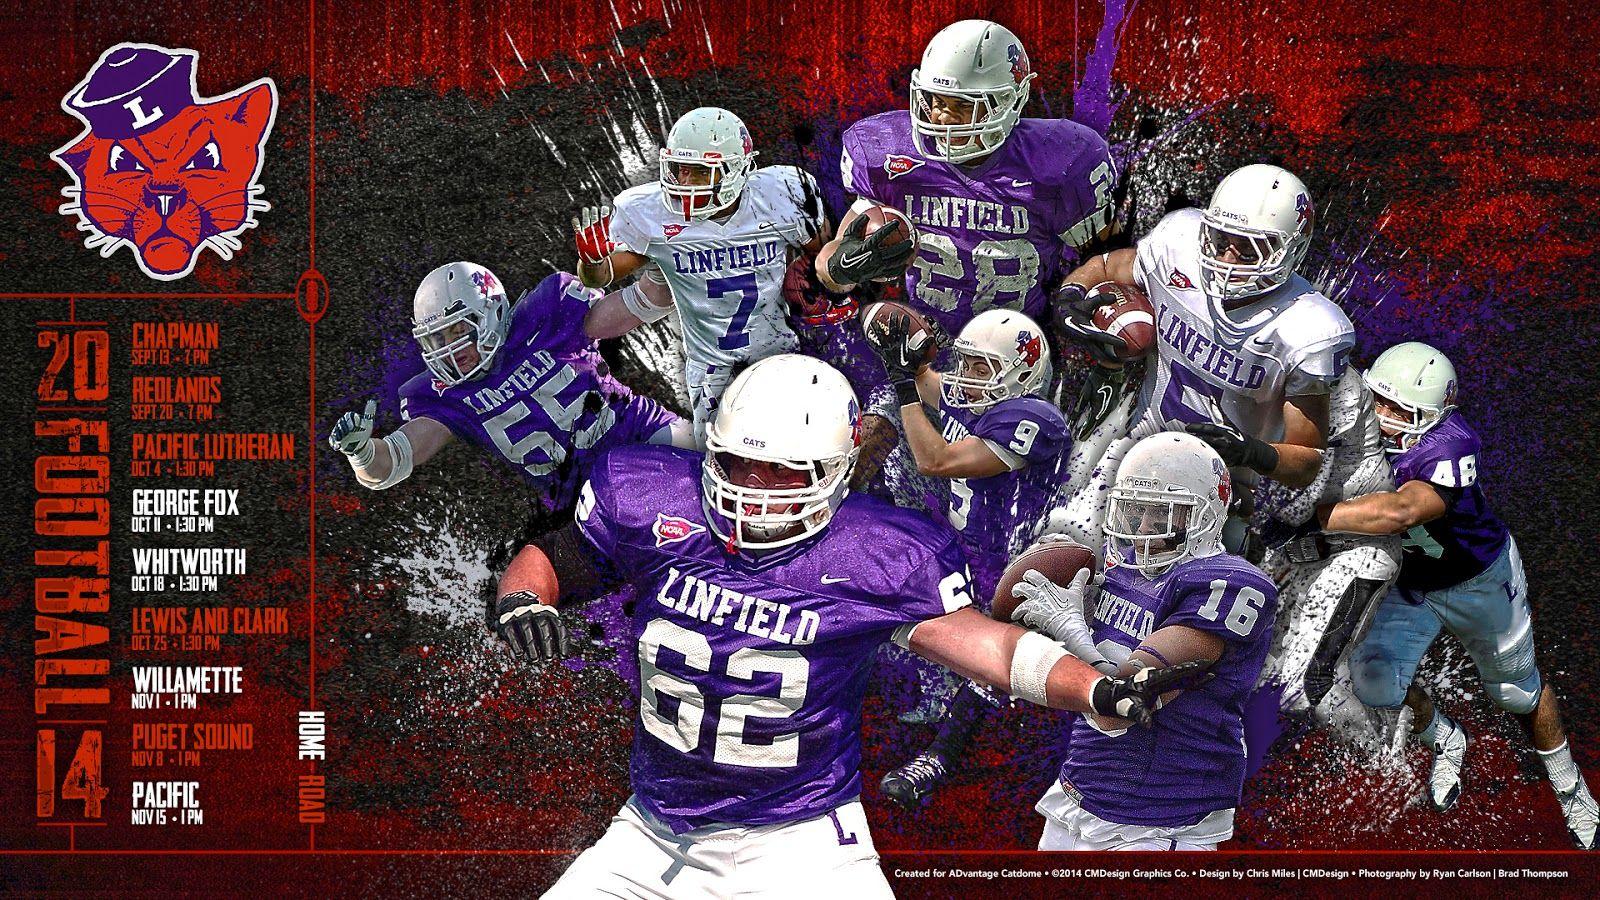 ADvantage Catdome: Your 2014 Linfield College Football Wallpaper!!!!